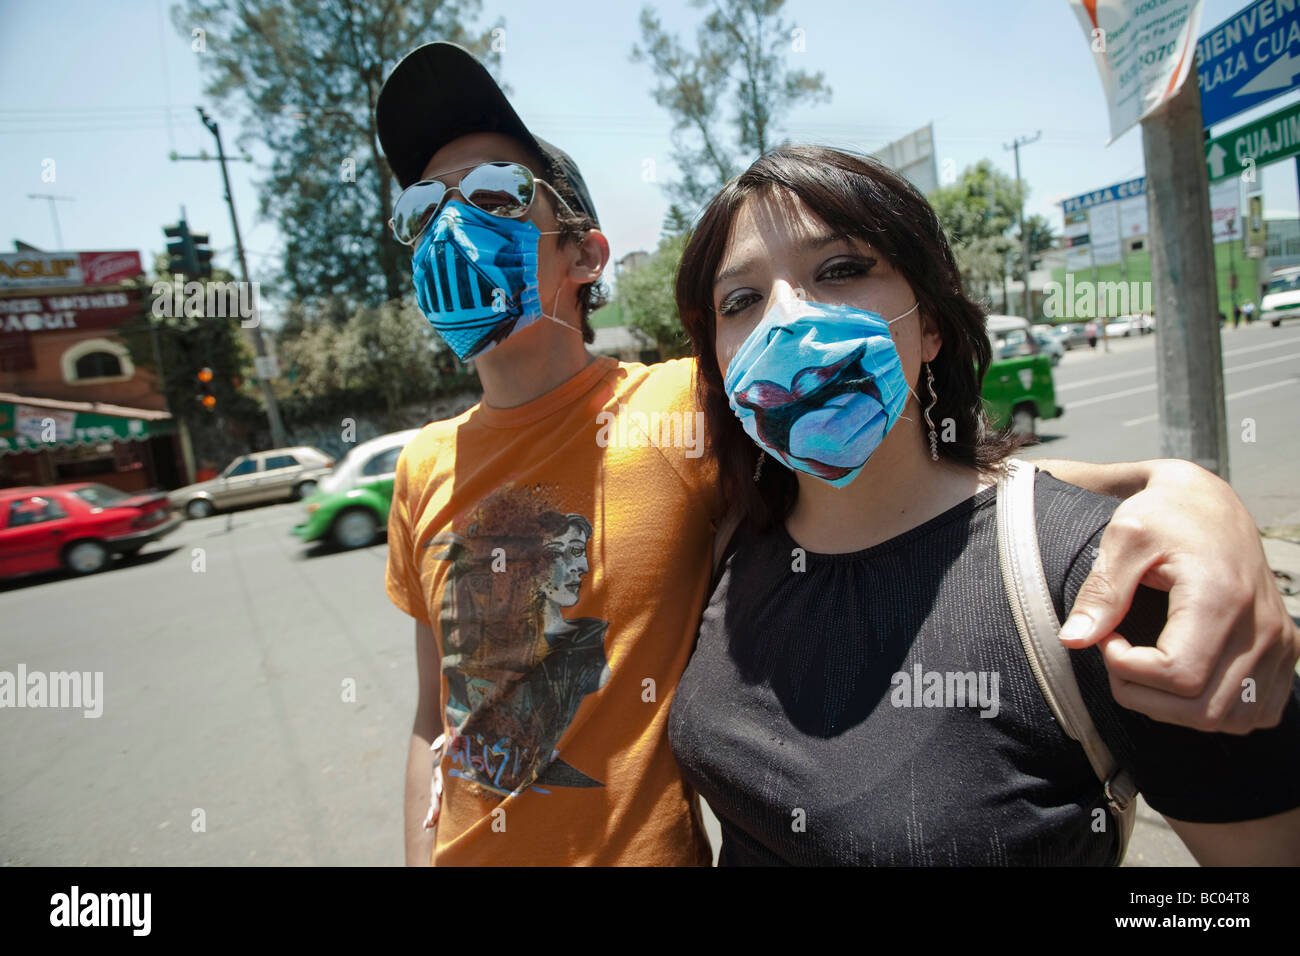 A young couple wears funny painted masks in the street during the swine flu epidemic in Mexico City, DF, Mexico. Stock Photo